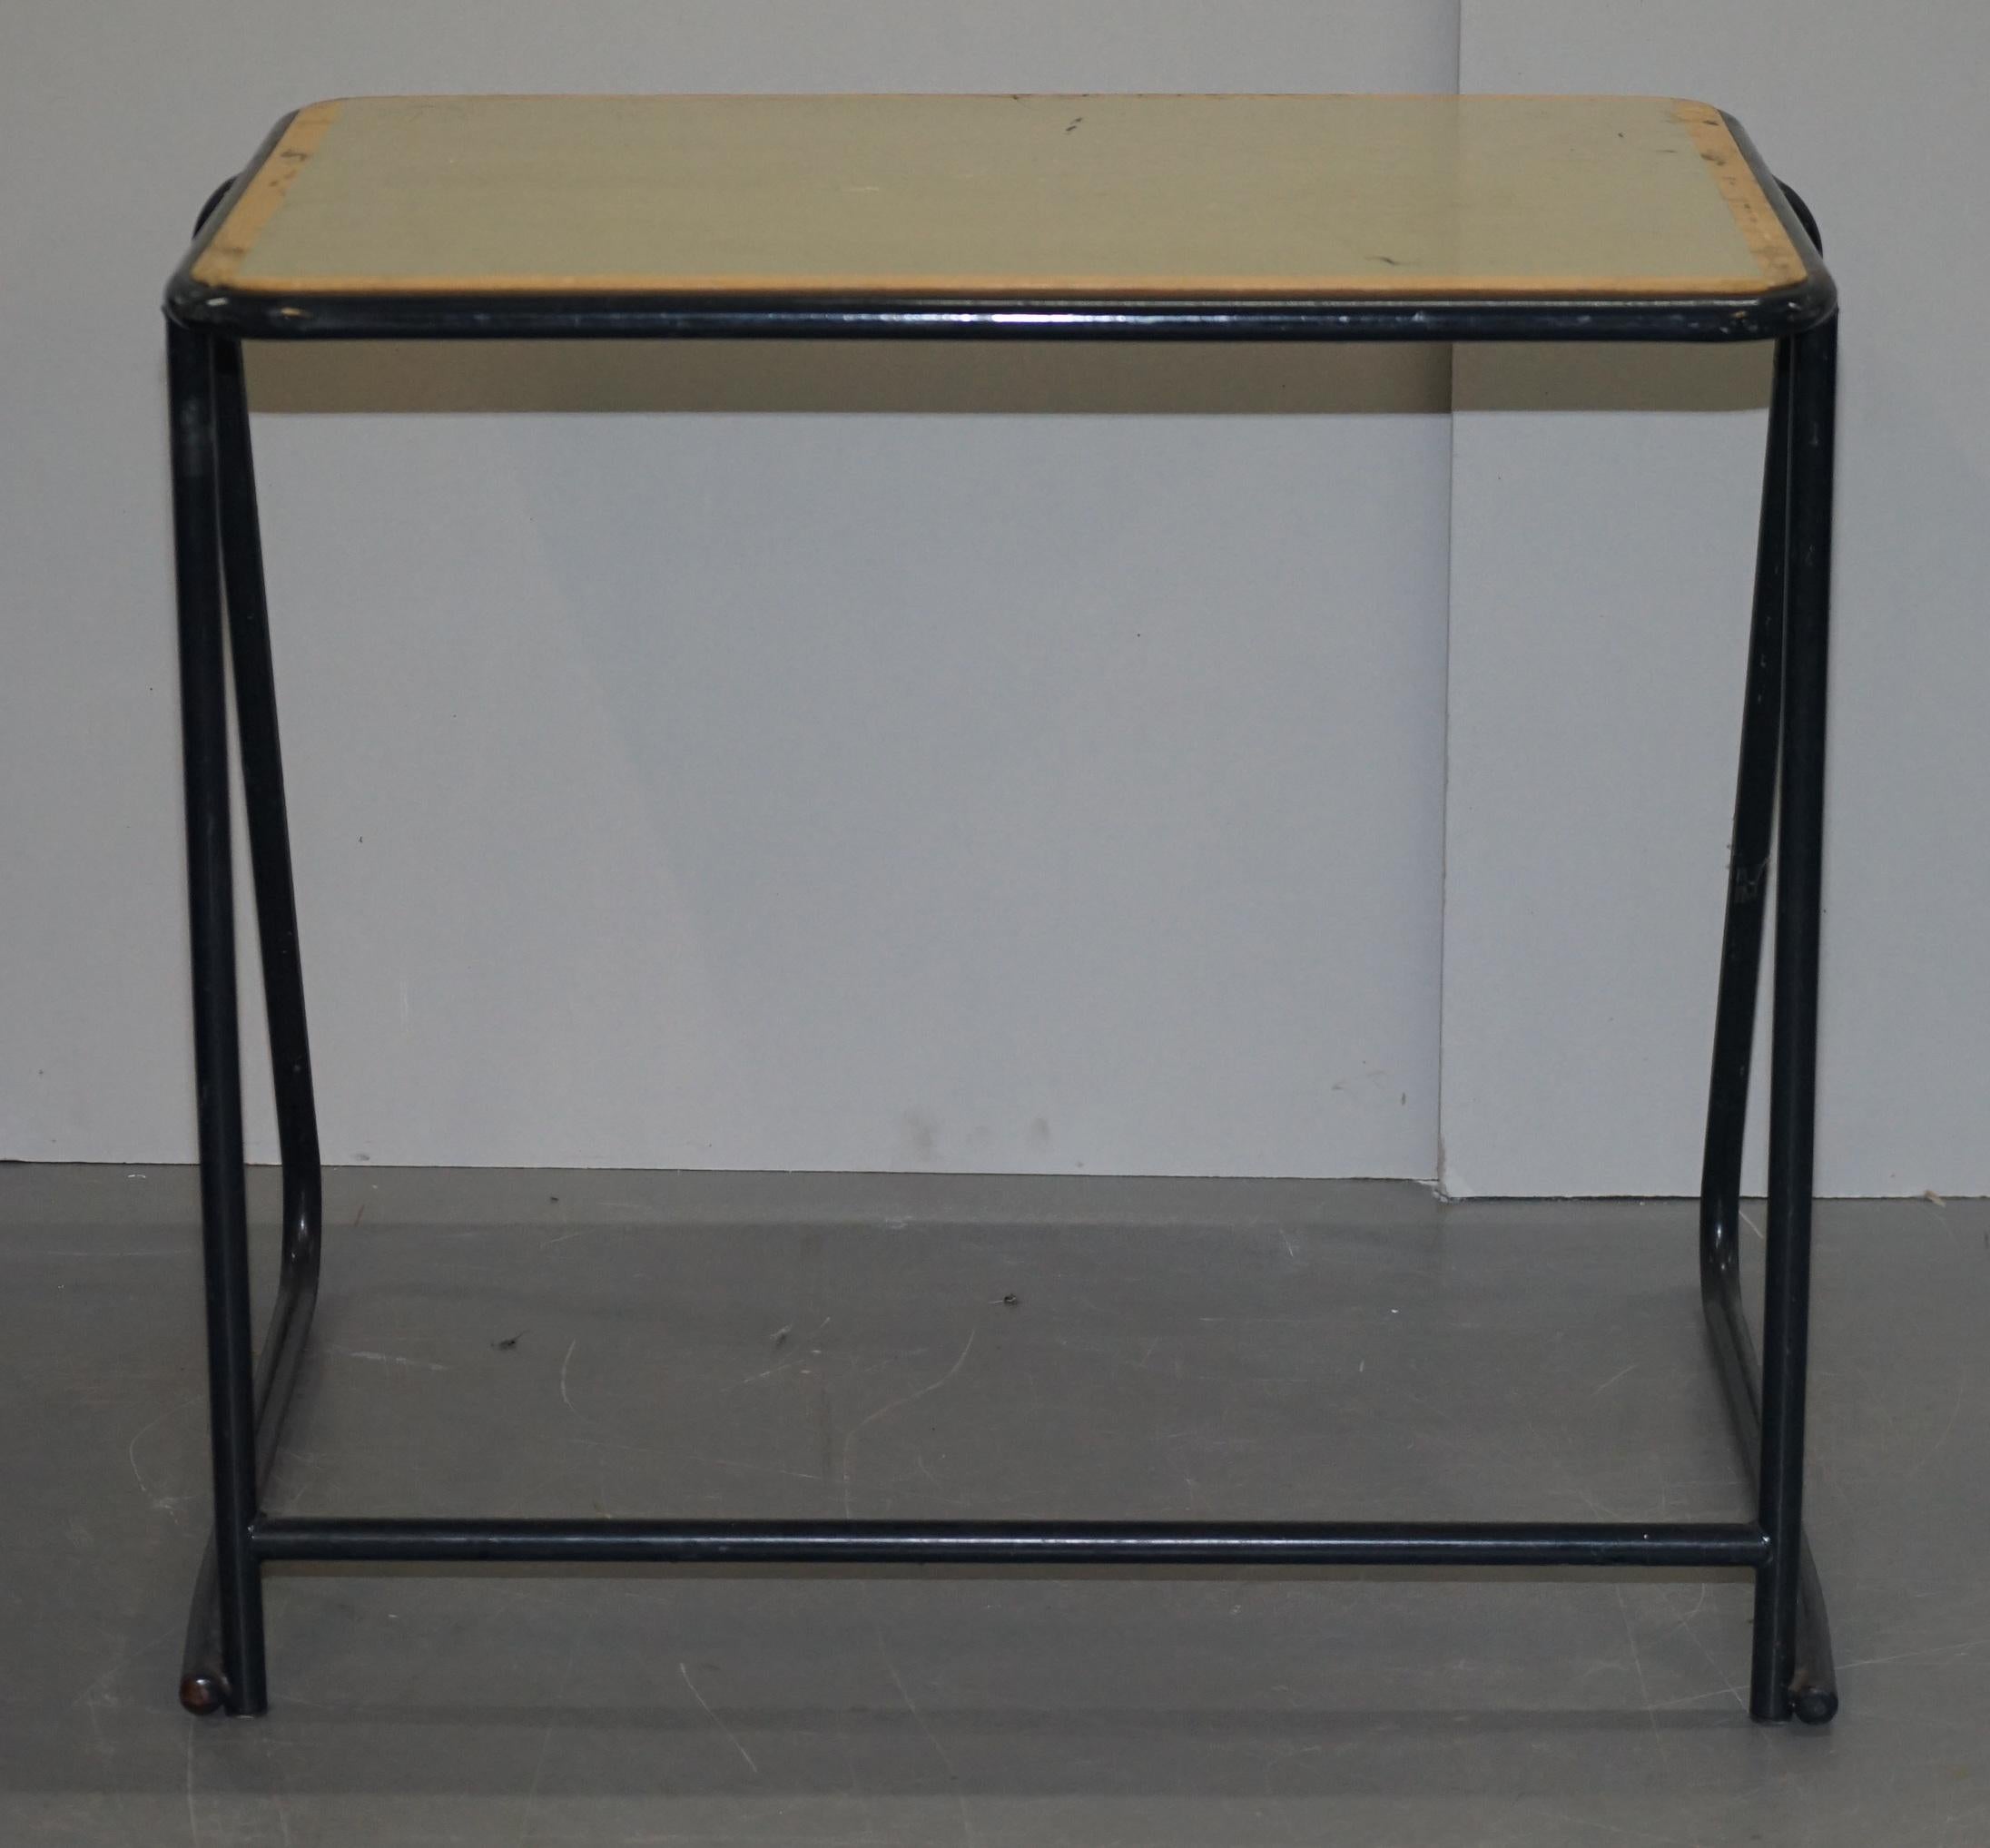 1 of 20 British Military Army Stacking Desk Tables Full Sized Stainless Steel For Sale 3